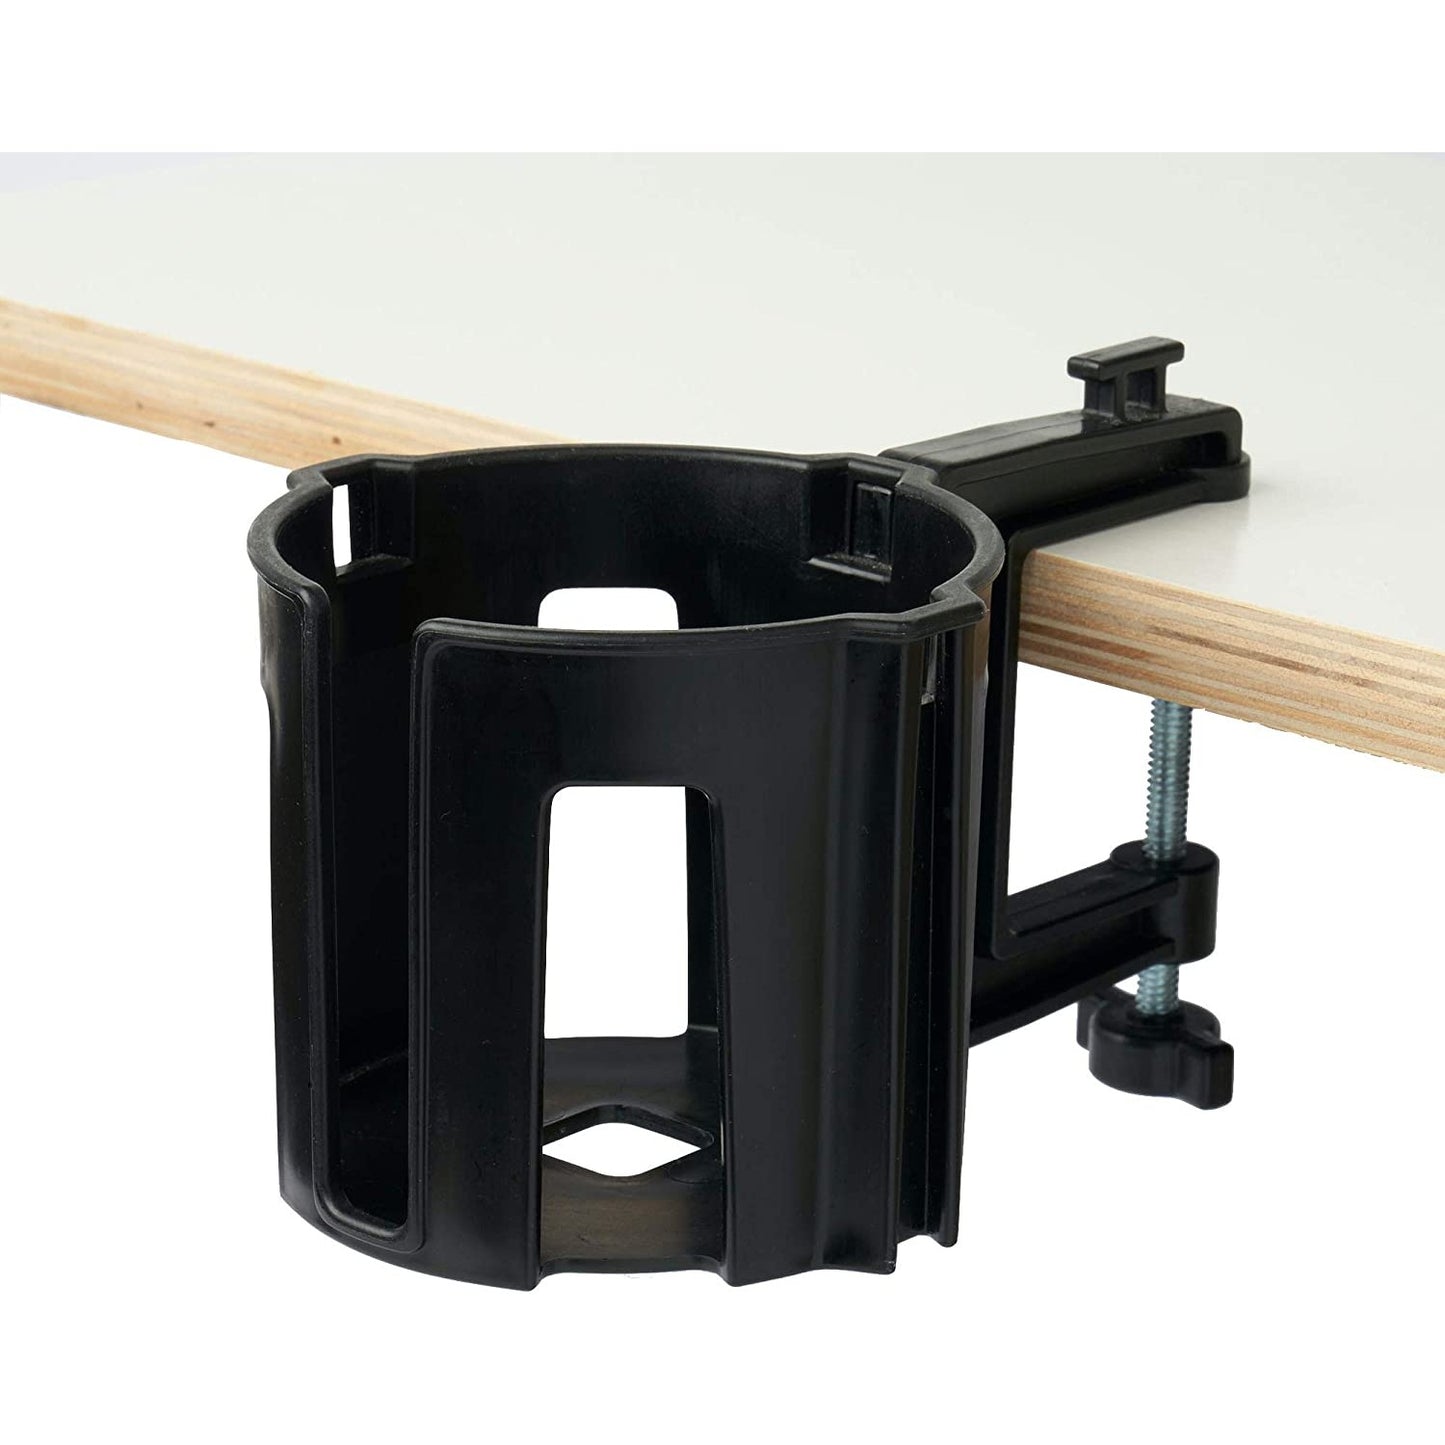 A black colored cup holster which is attached to a desk with a non-scratch clamp.